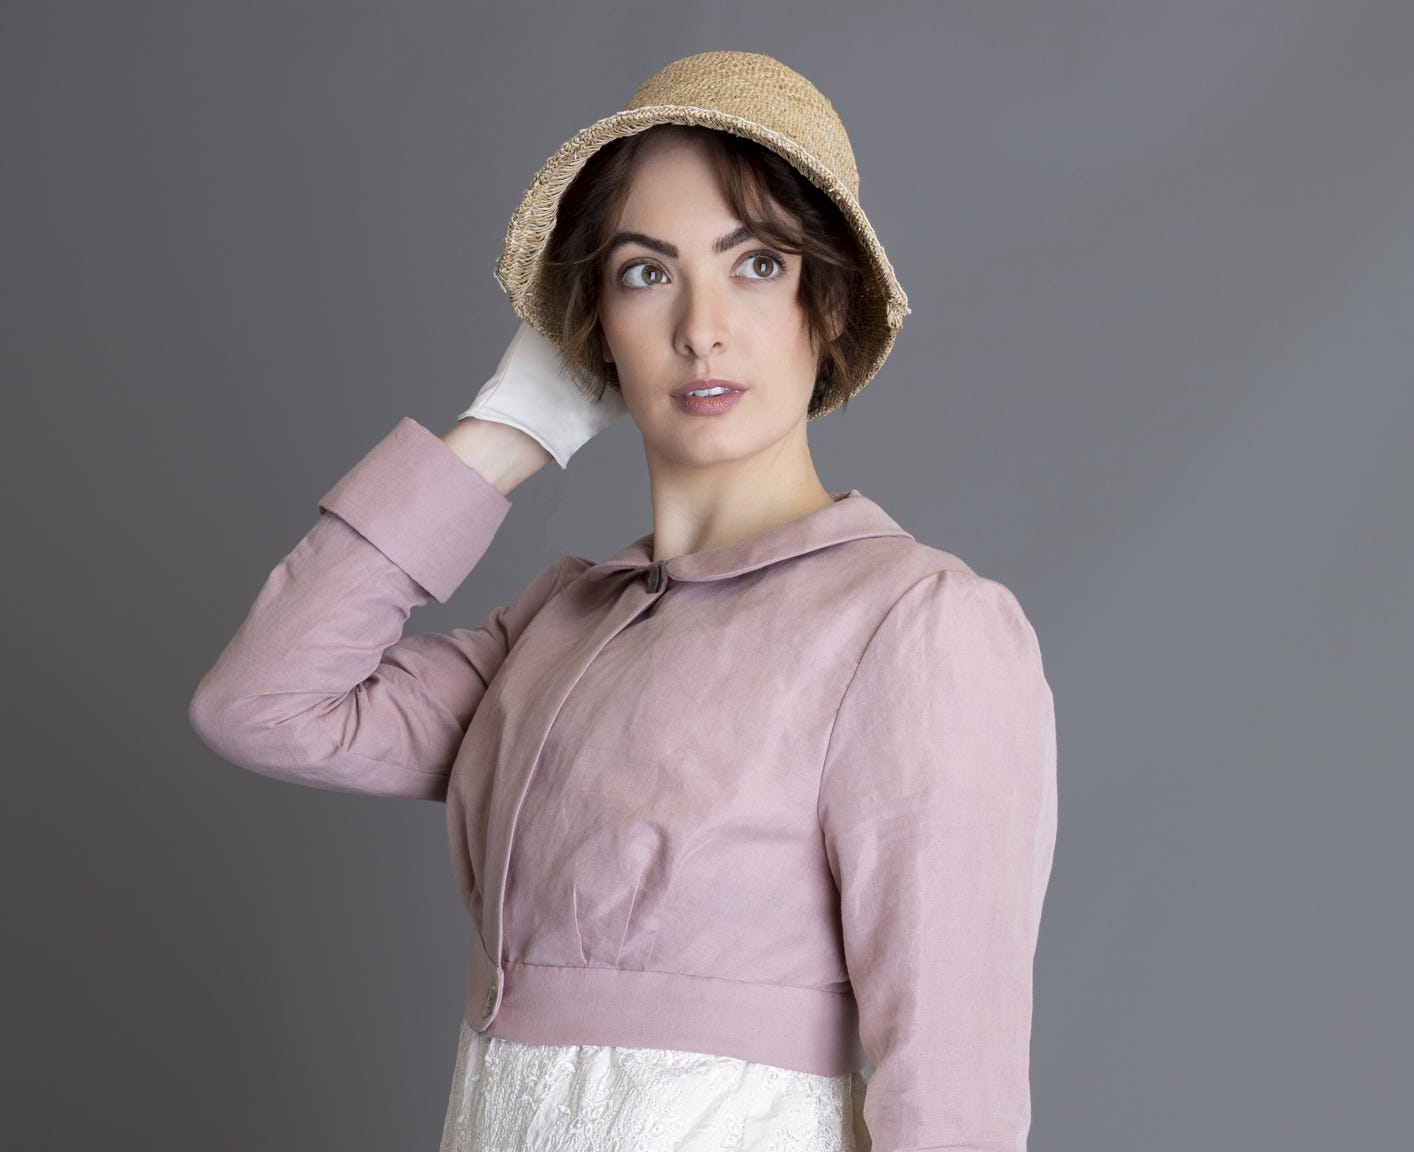 Dark-haired woman in rose Regency dress strikes a confident pose Jane Austen makes some of her strongest statements through her most minor characters, like Persuasion’s Navy wife Sophia Croft, who says, ‘None of us expect to be in smooth water all our days.’ Photo: Artycrafter | Dreamstime.com